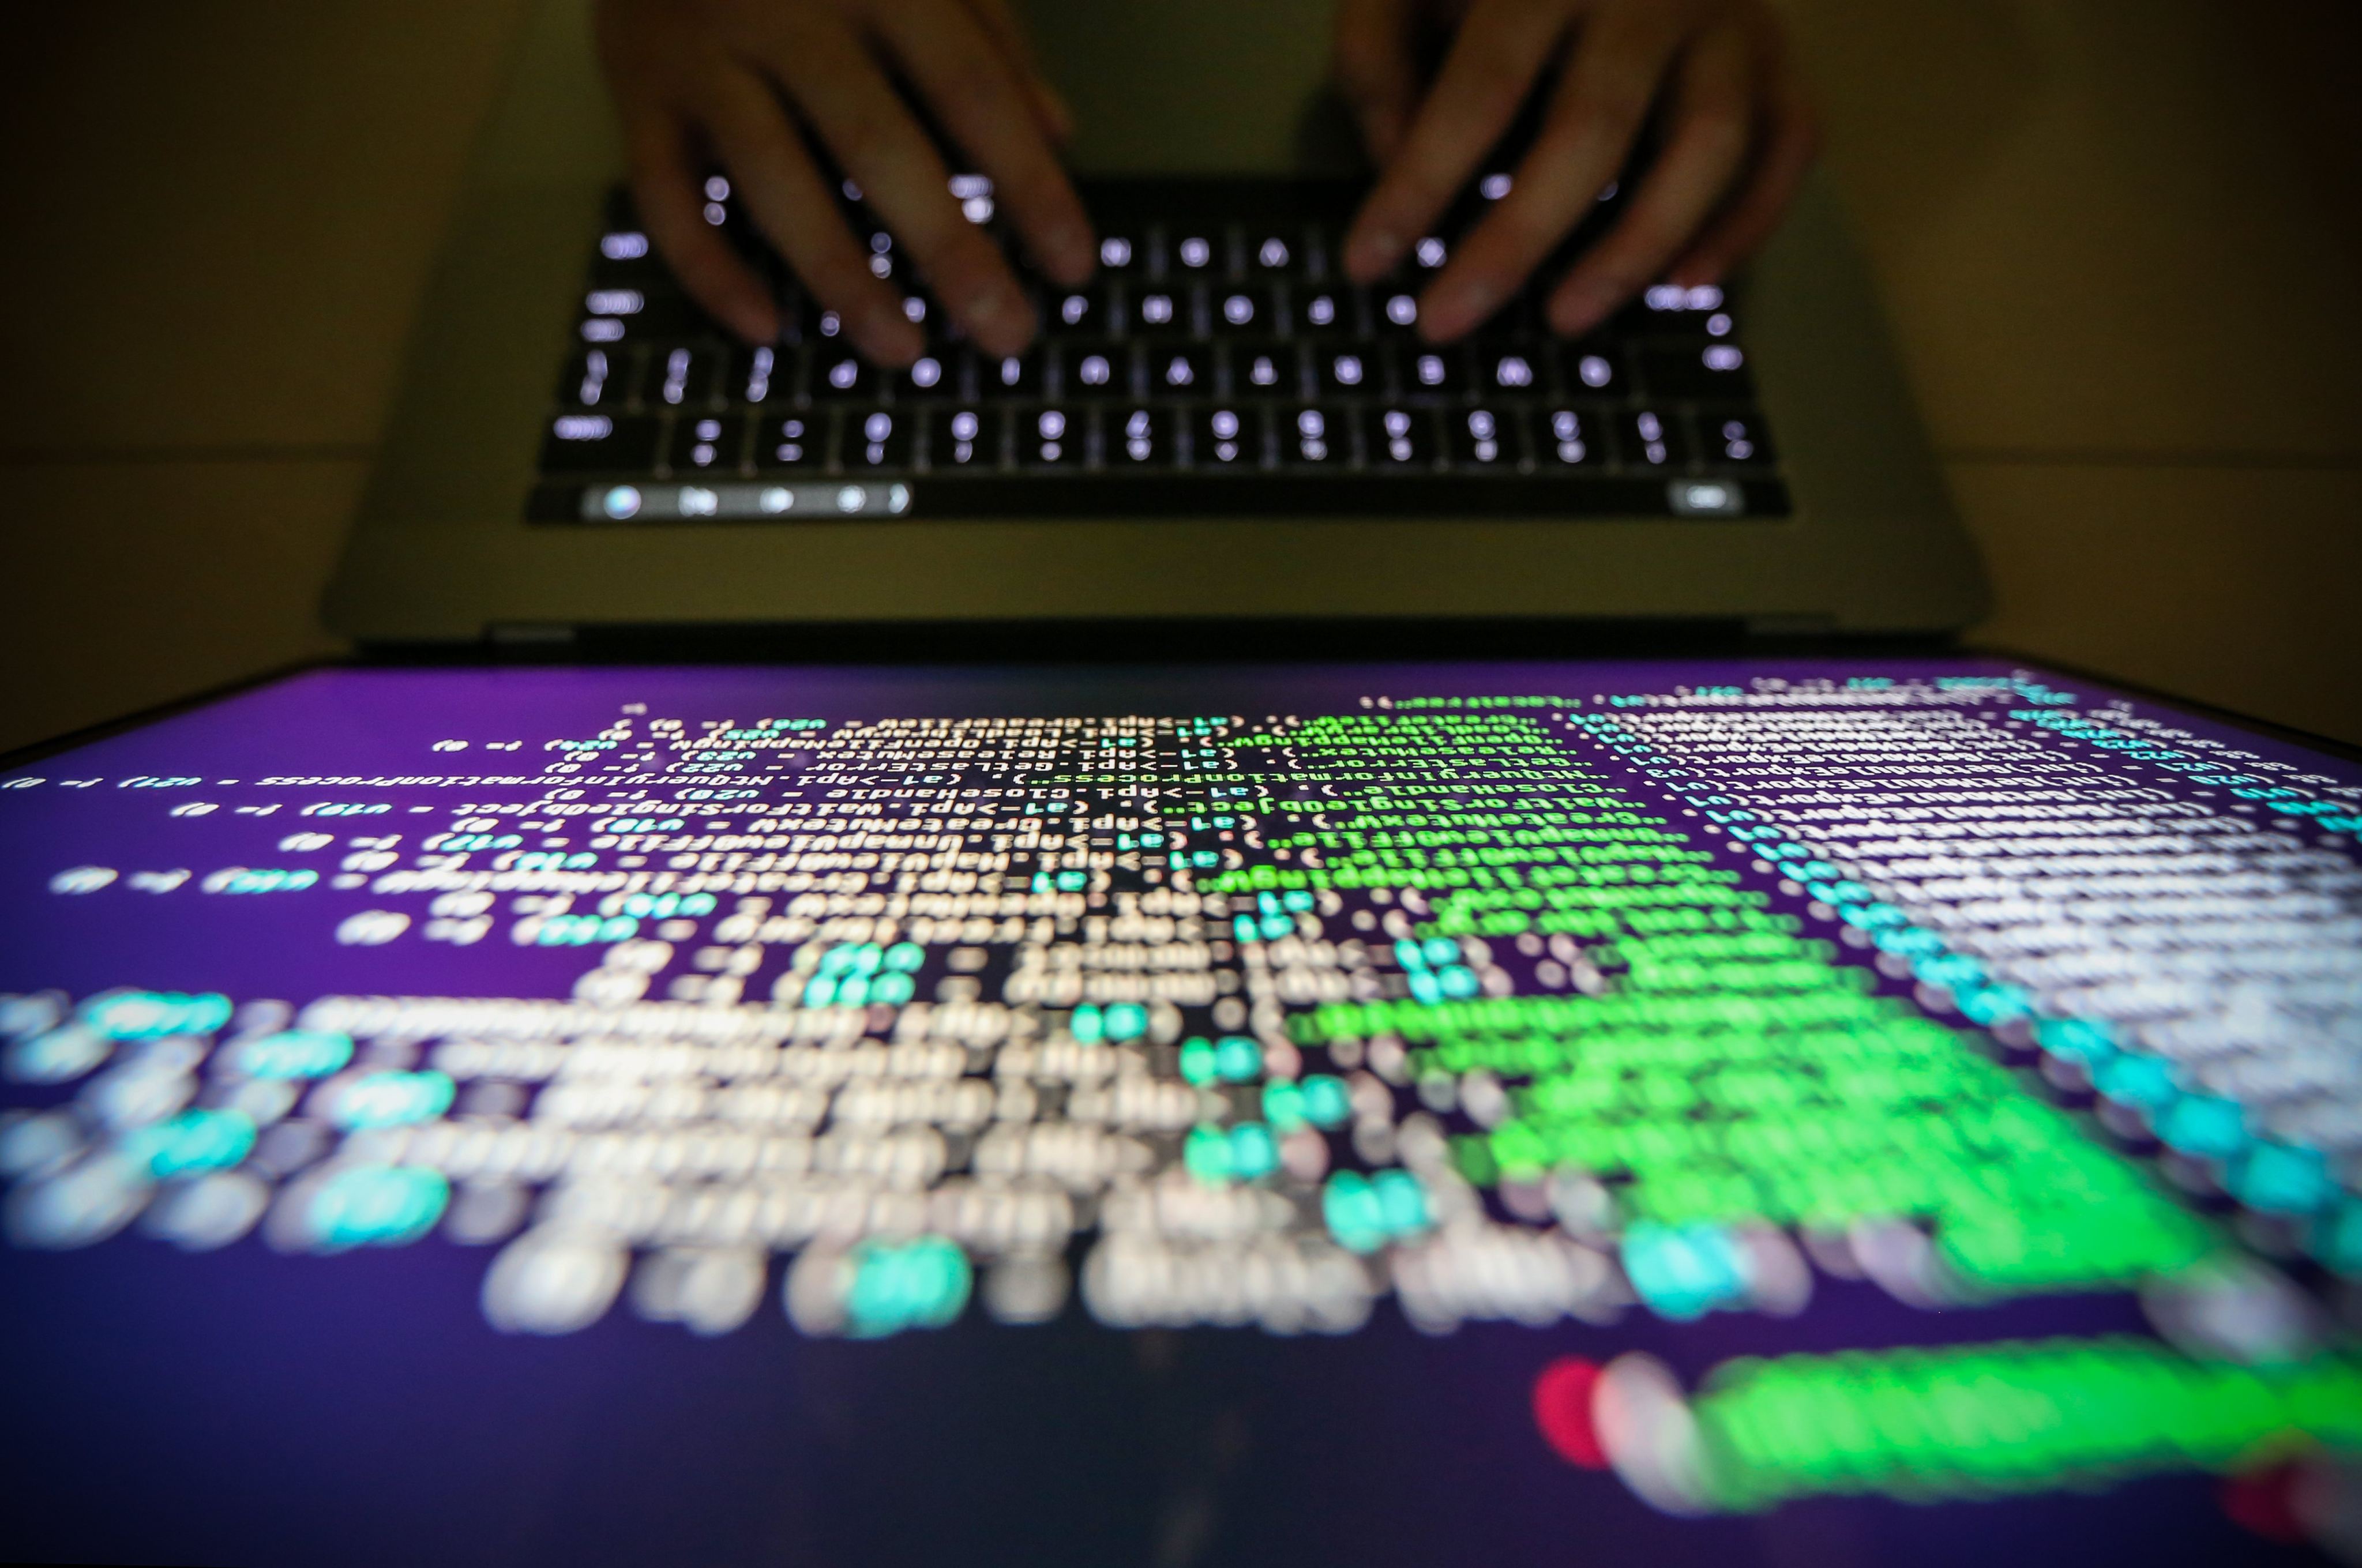 A programmer shows an example of decrypting source code in Taipei on May 13, 2017. Photo: EPA